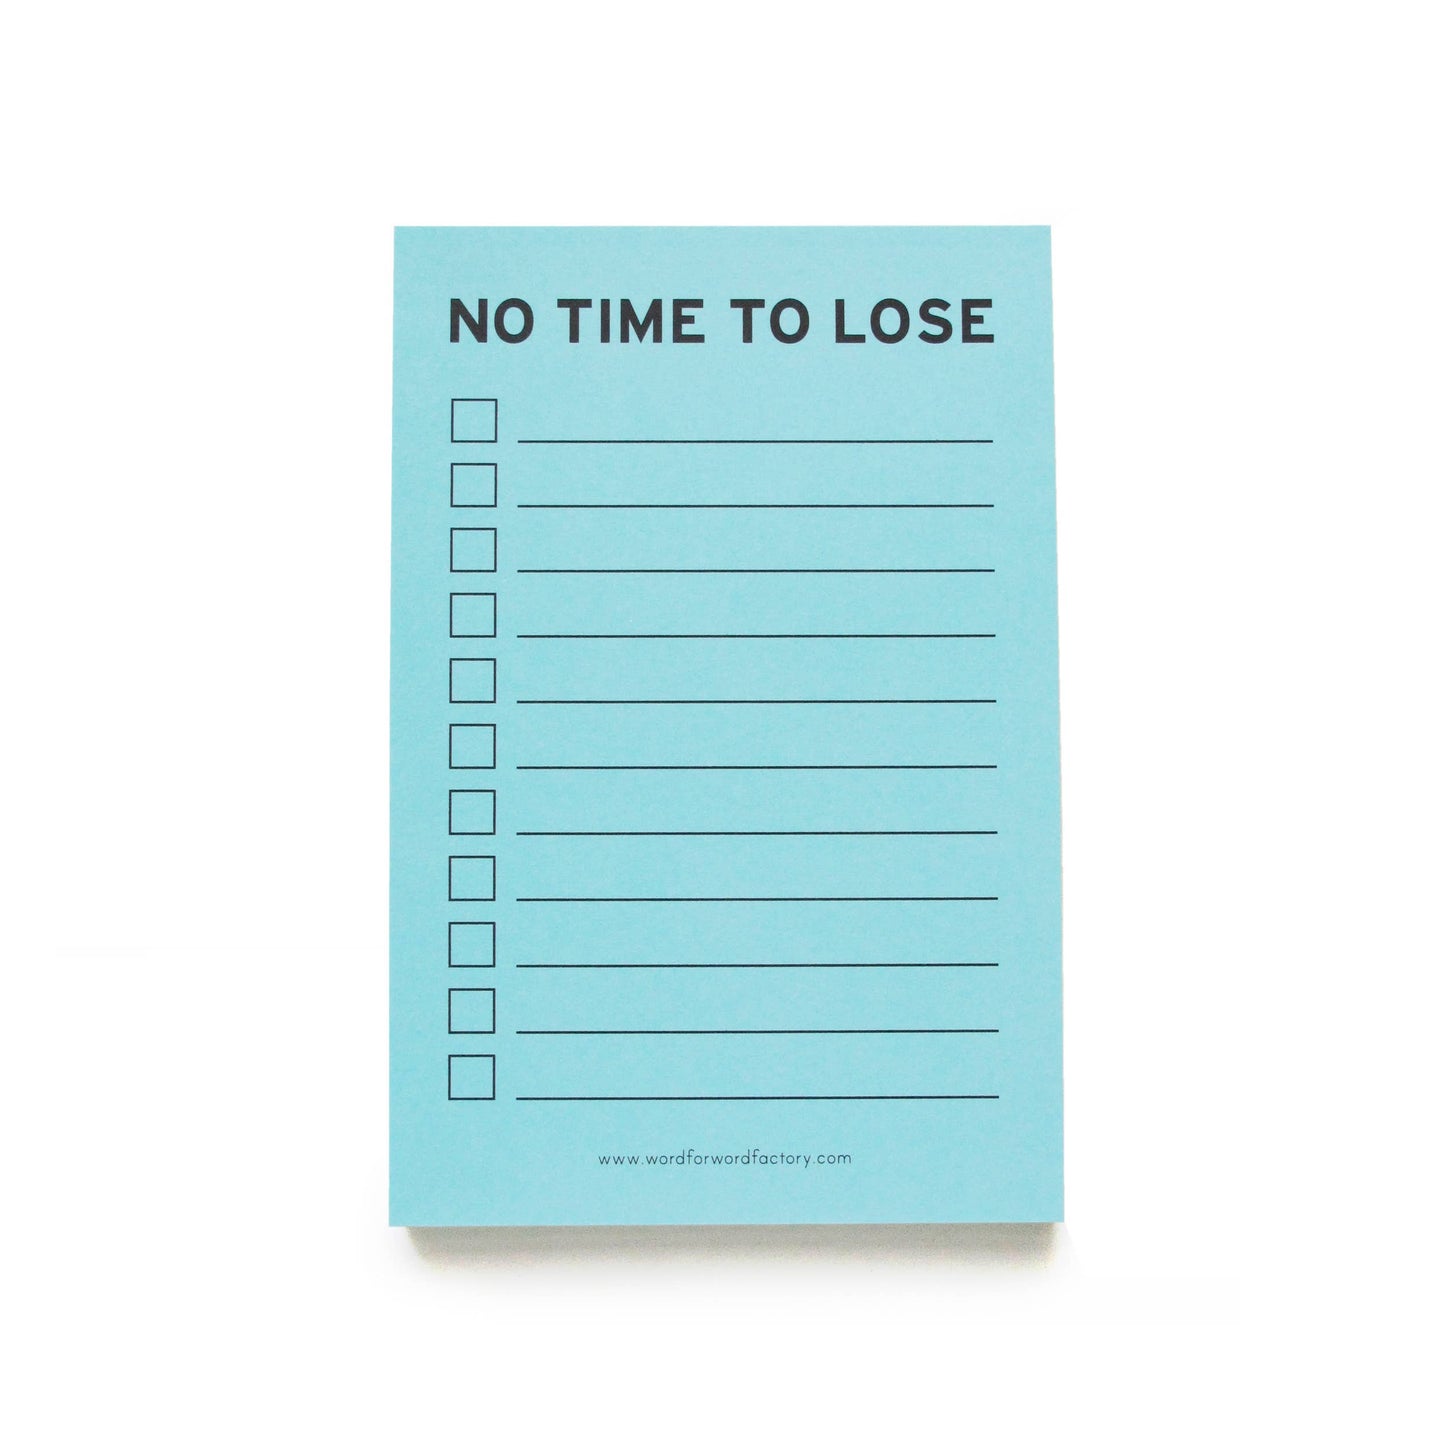 Notepad with header "No time to lose" and a checklist. Light blue paper.